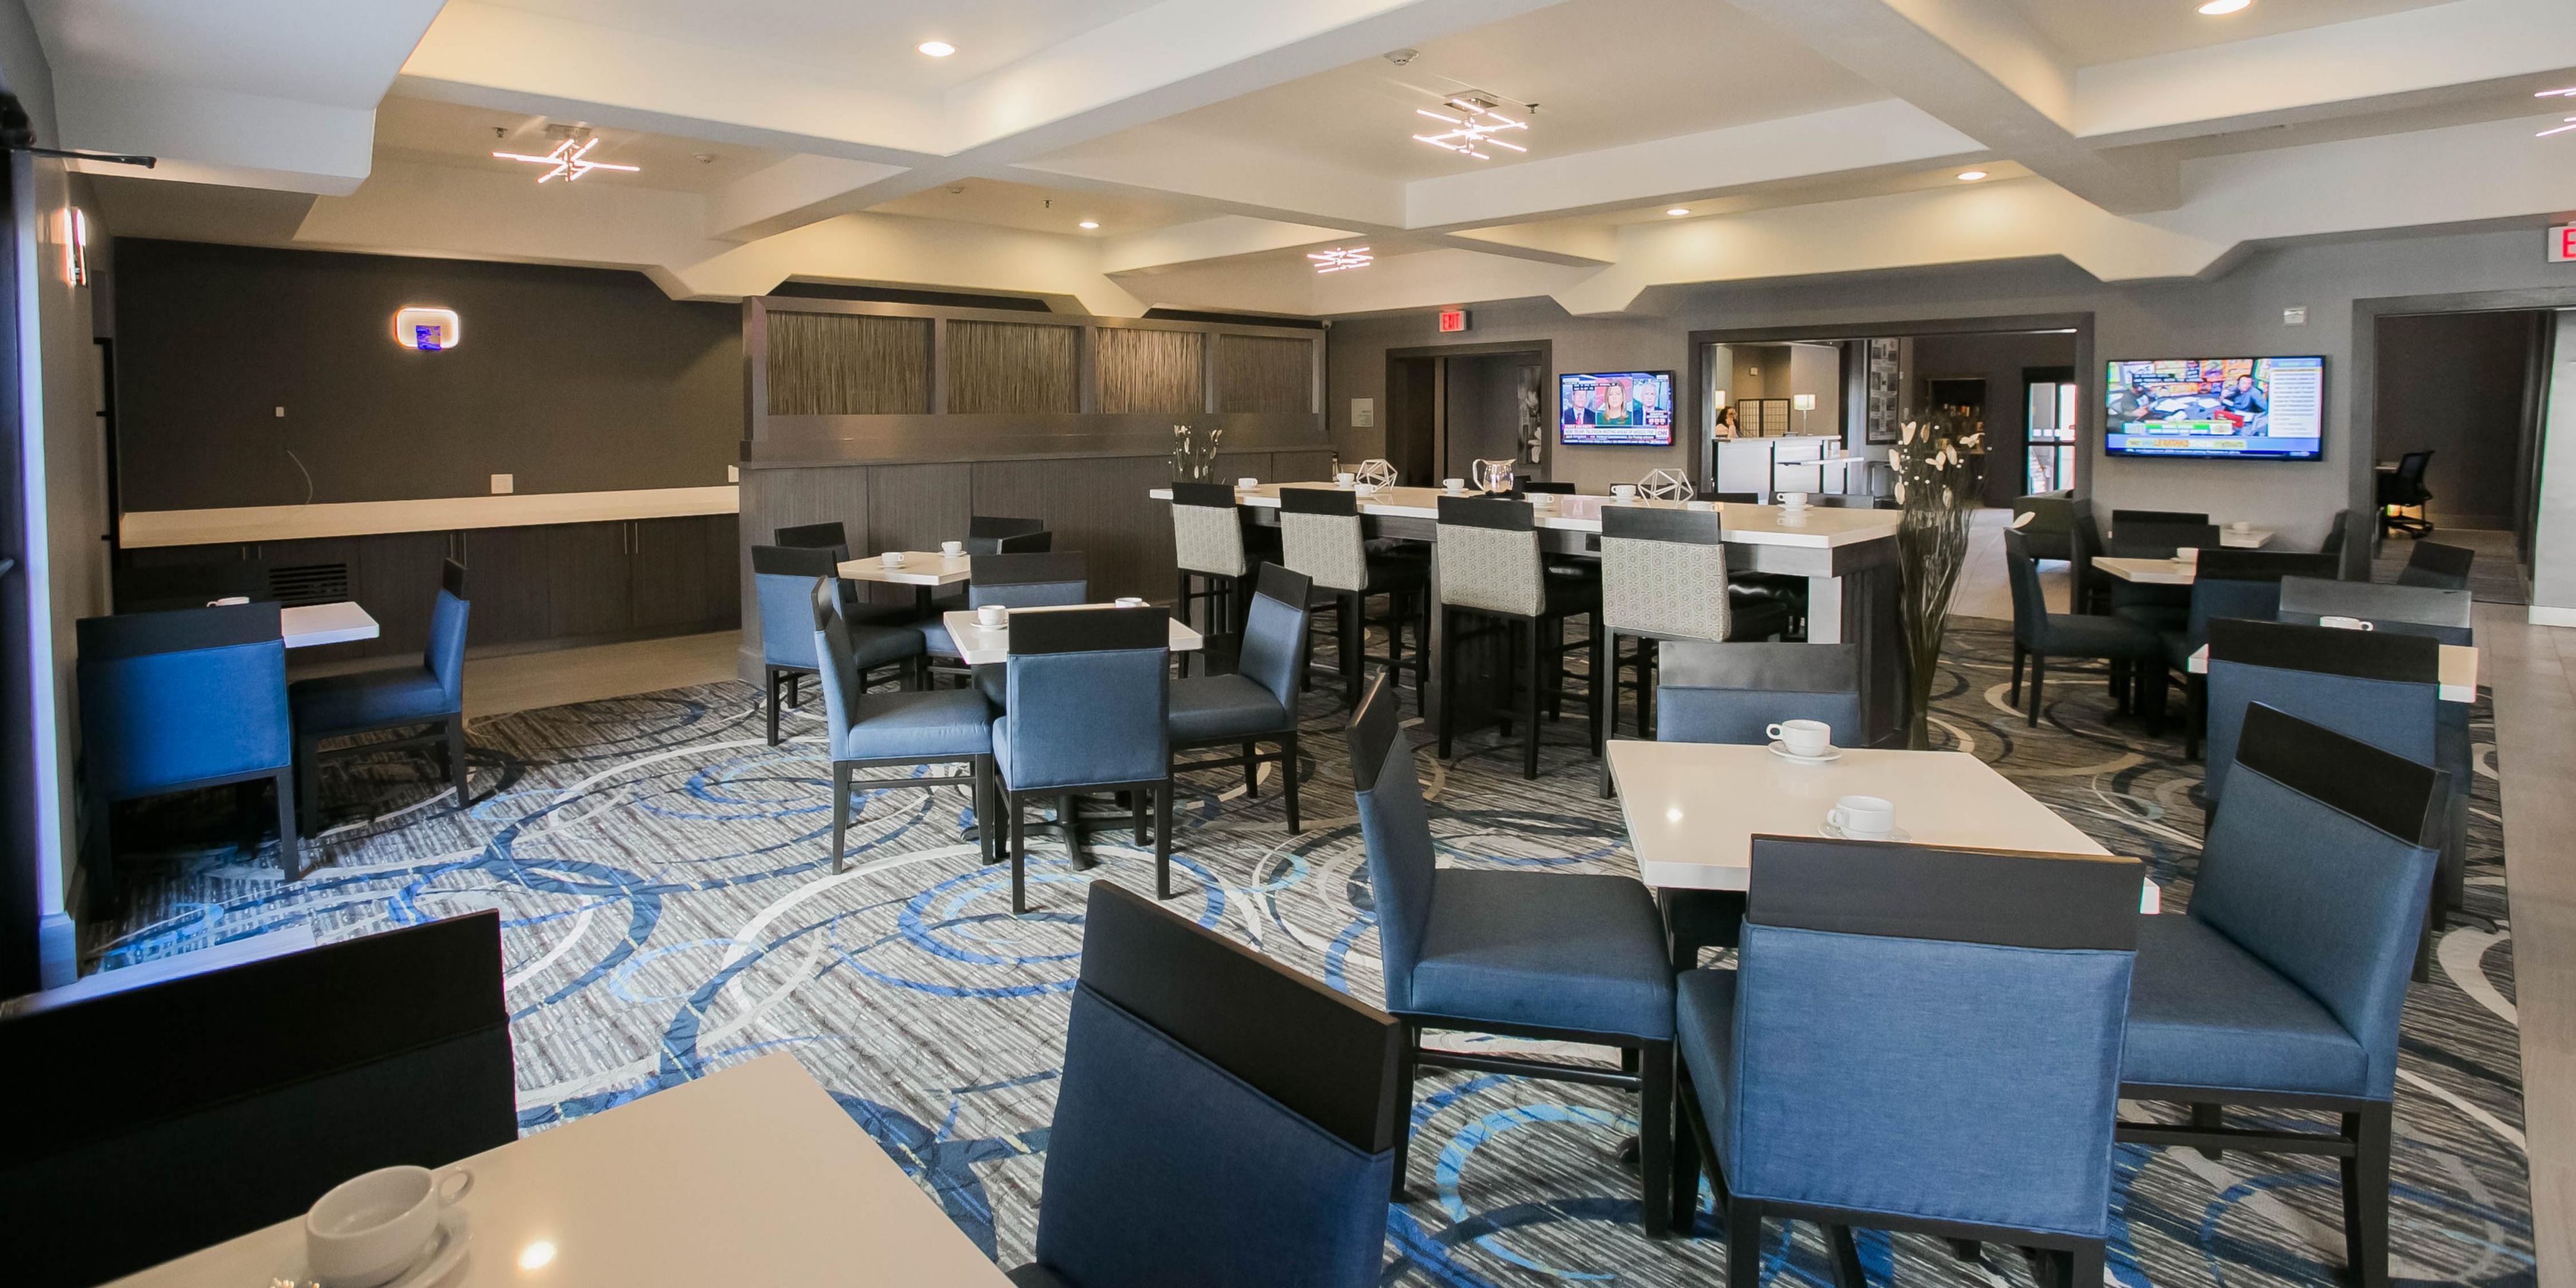 The Lambortini Bar & Grill is open daily for breakfast and lunch